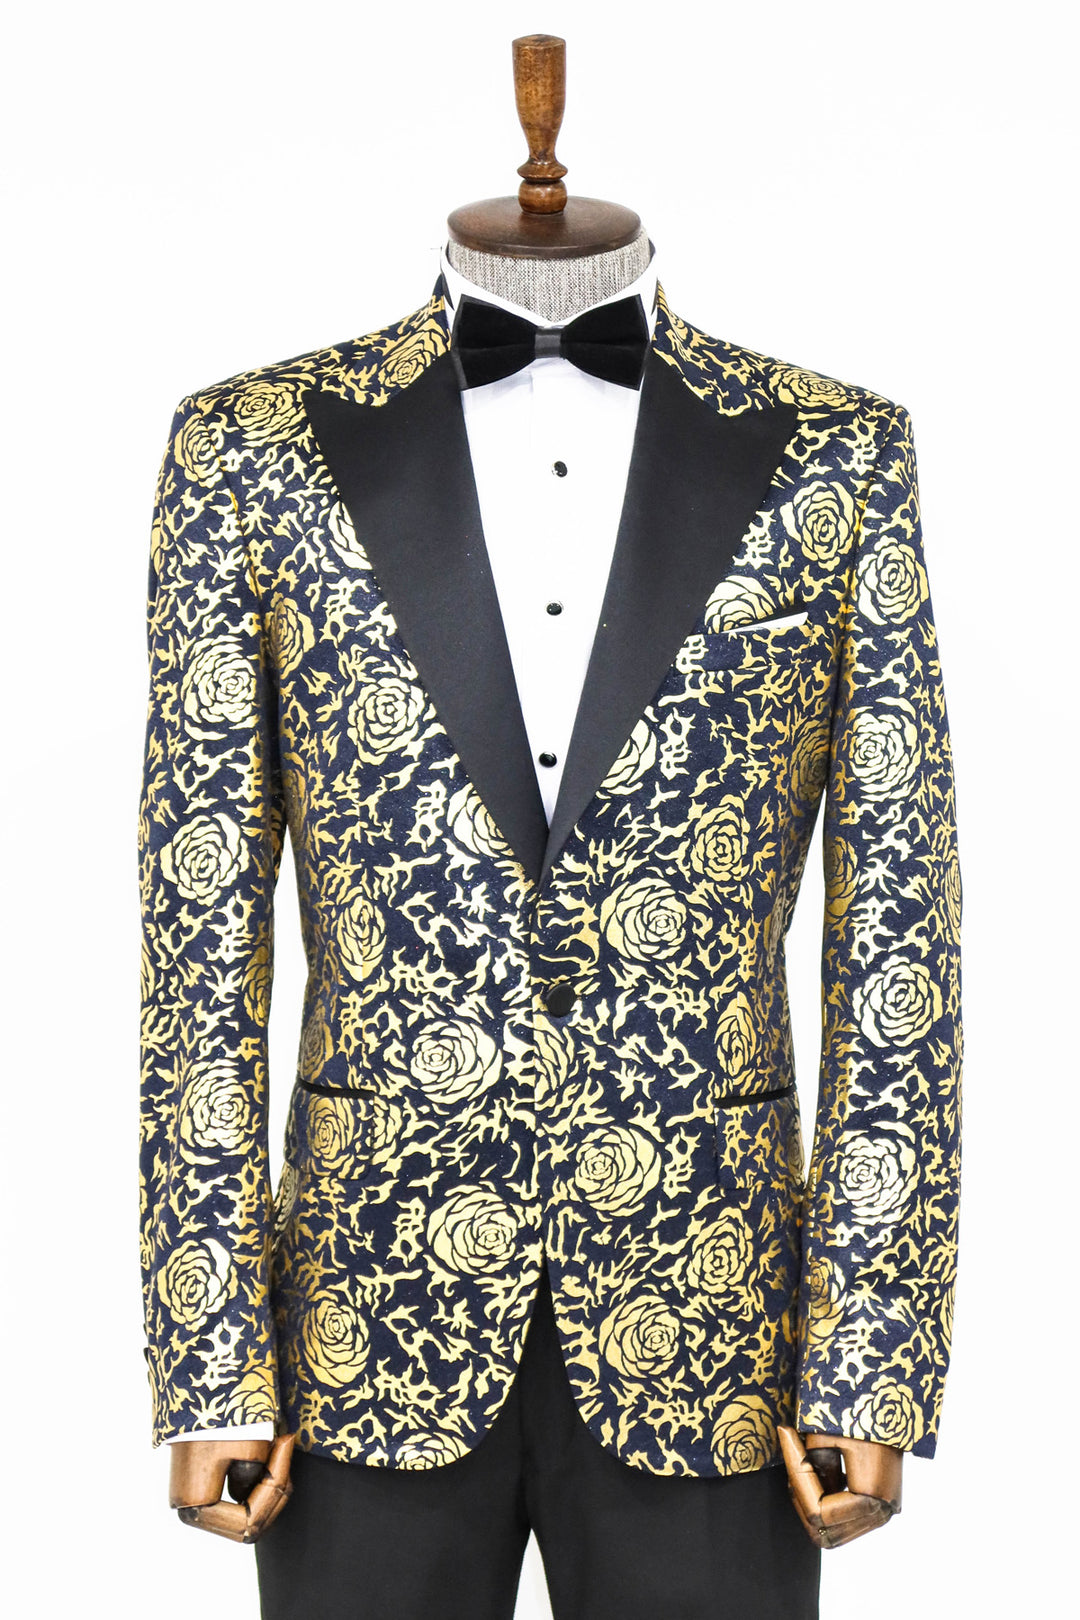 Gold Rose Patterned Slim Fit Navy Blue Men Prom Blazer and Trousers Combination- Wessi